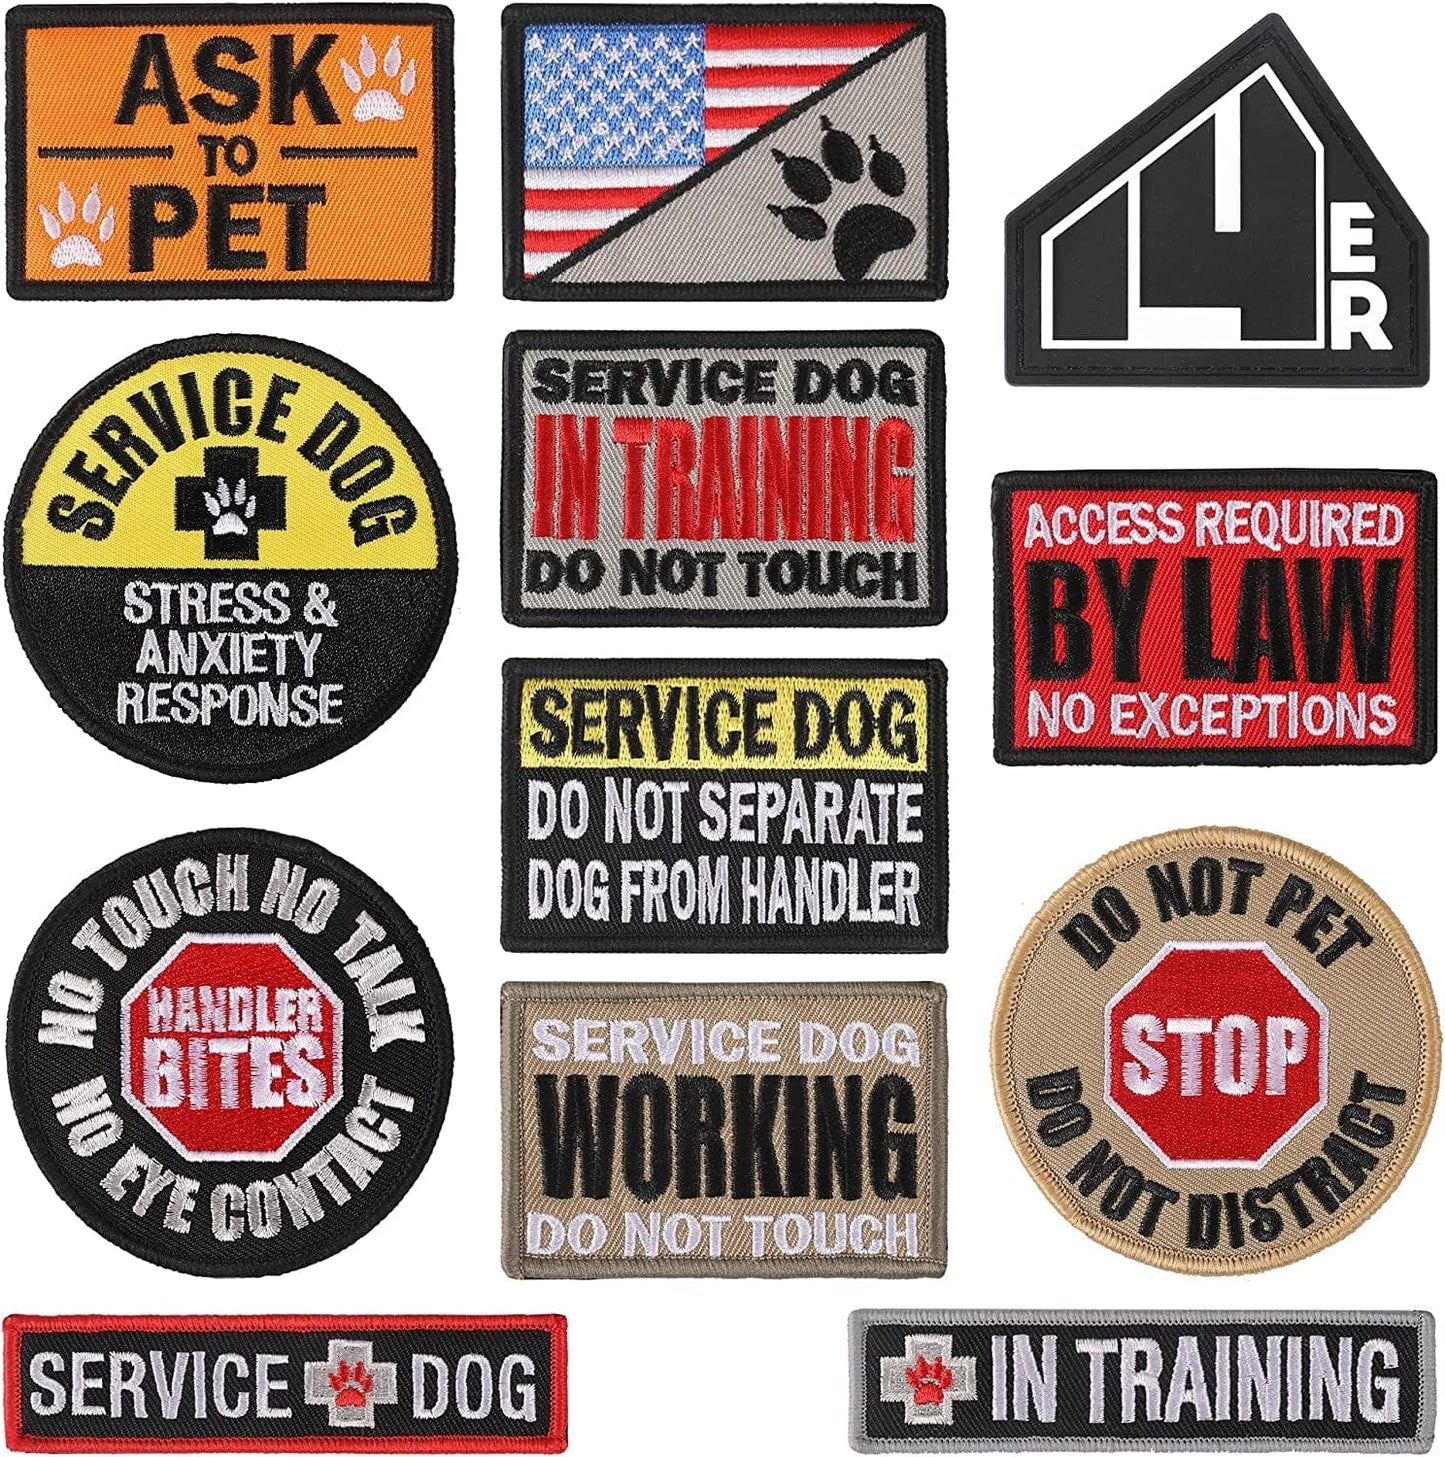  12 Pieces Service Dog Patches Removable Tactical Dog Vest  Harness Patches Embroidered Hook Loop Dog Training Patch US Flag with Paw  Patches for Service Dog Training Working : Pet Supplies